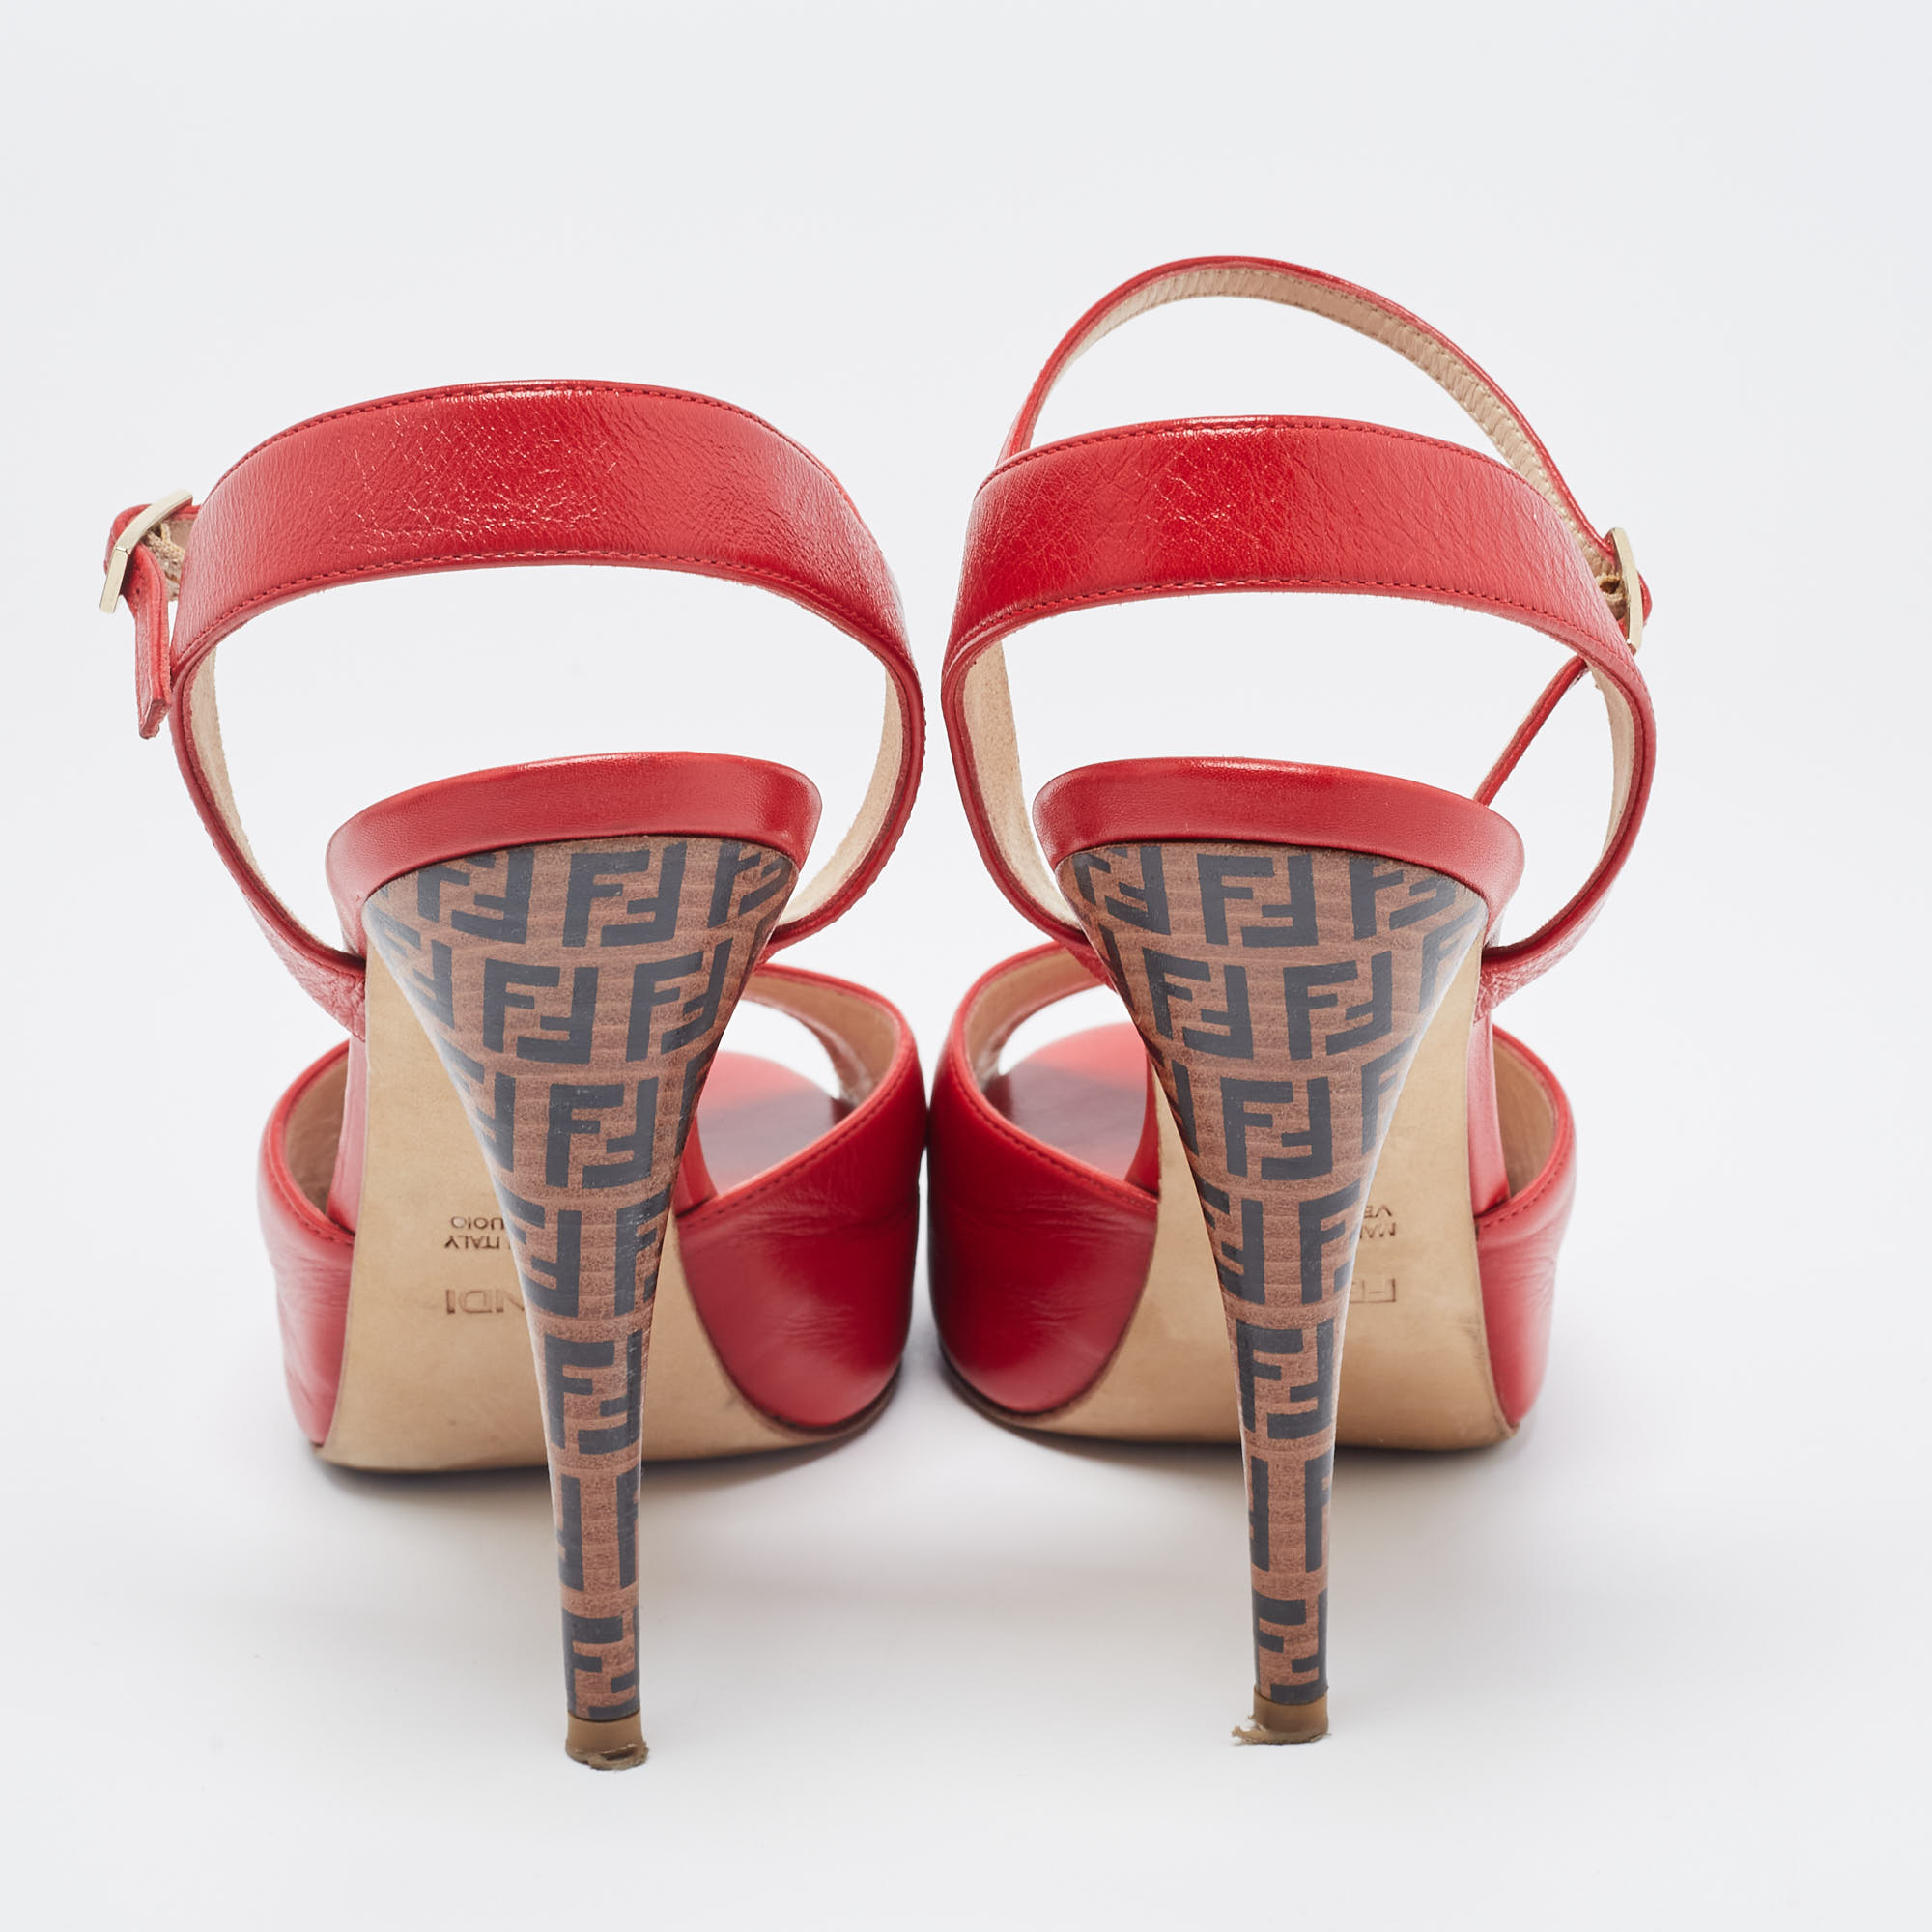 Fendi Red Leather  Open Toe Ankle Strap Sandals Size 39